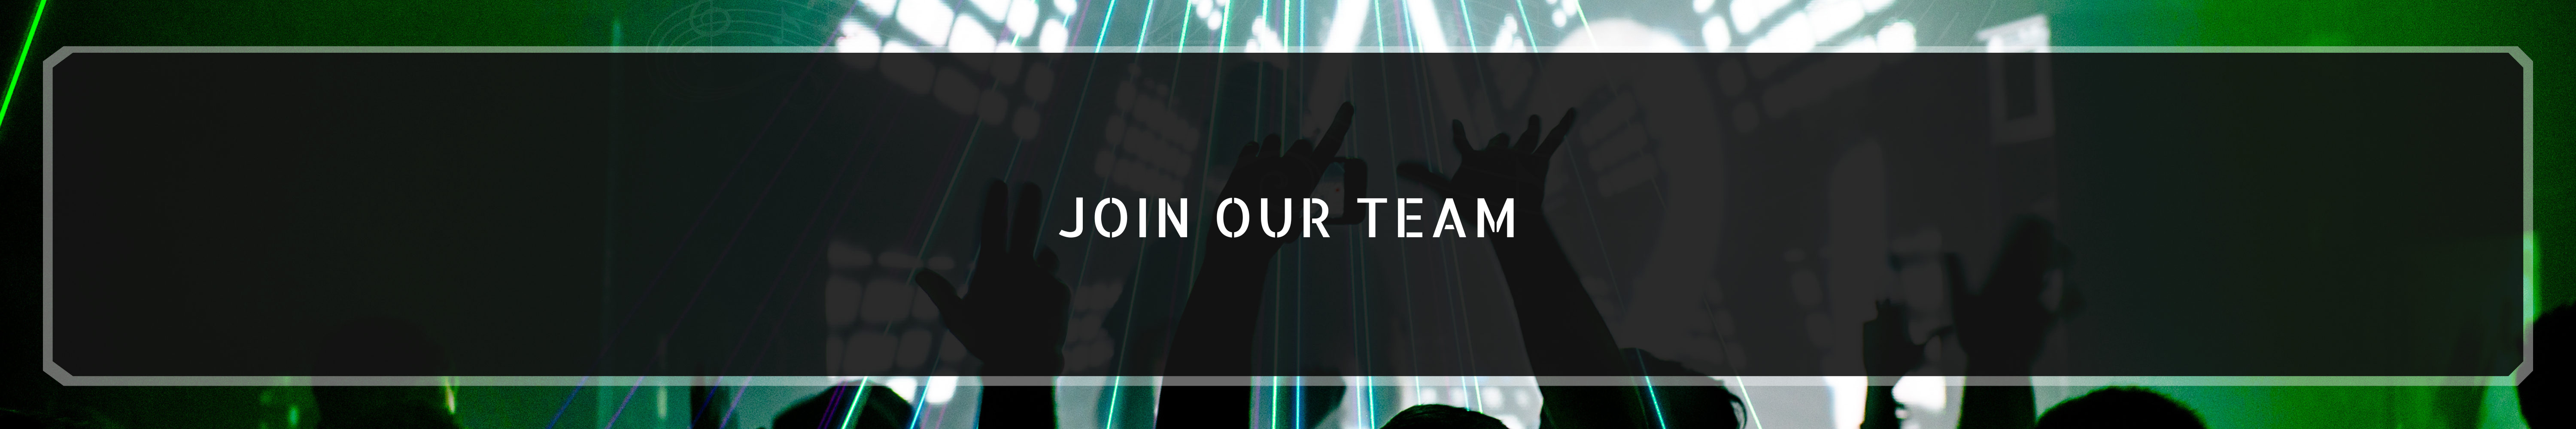 Join Our Team (6000 × 1000 px)